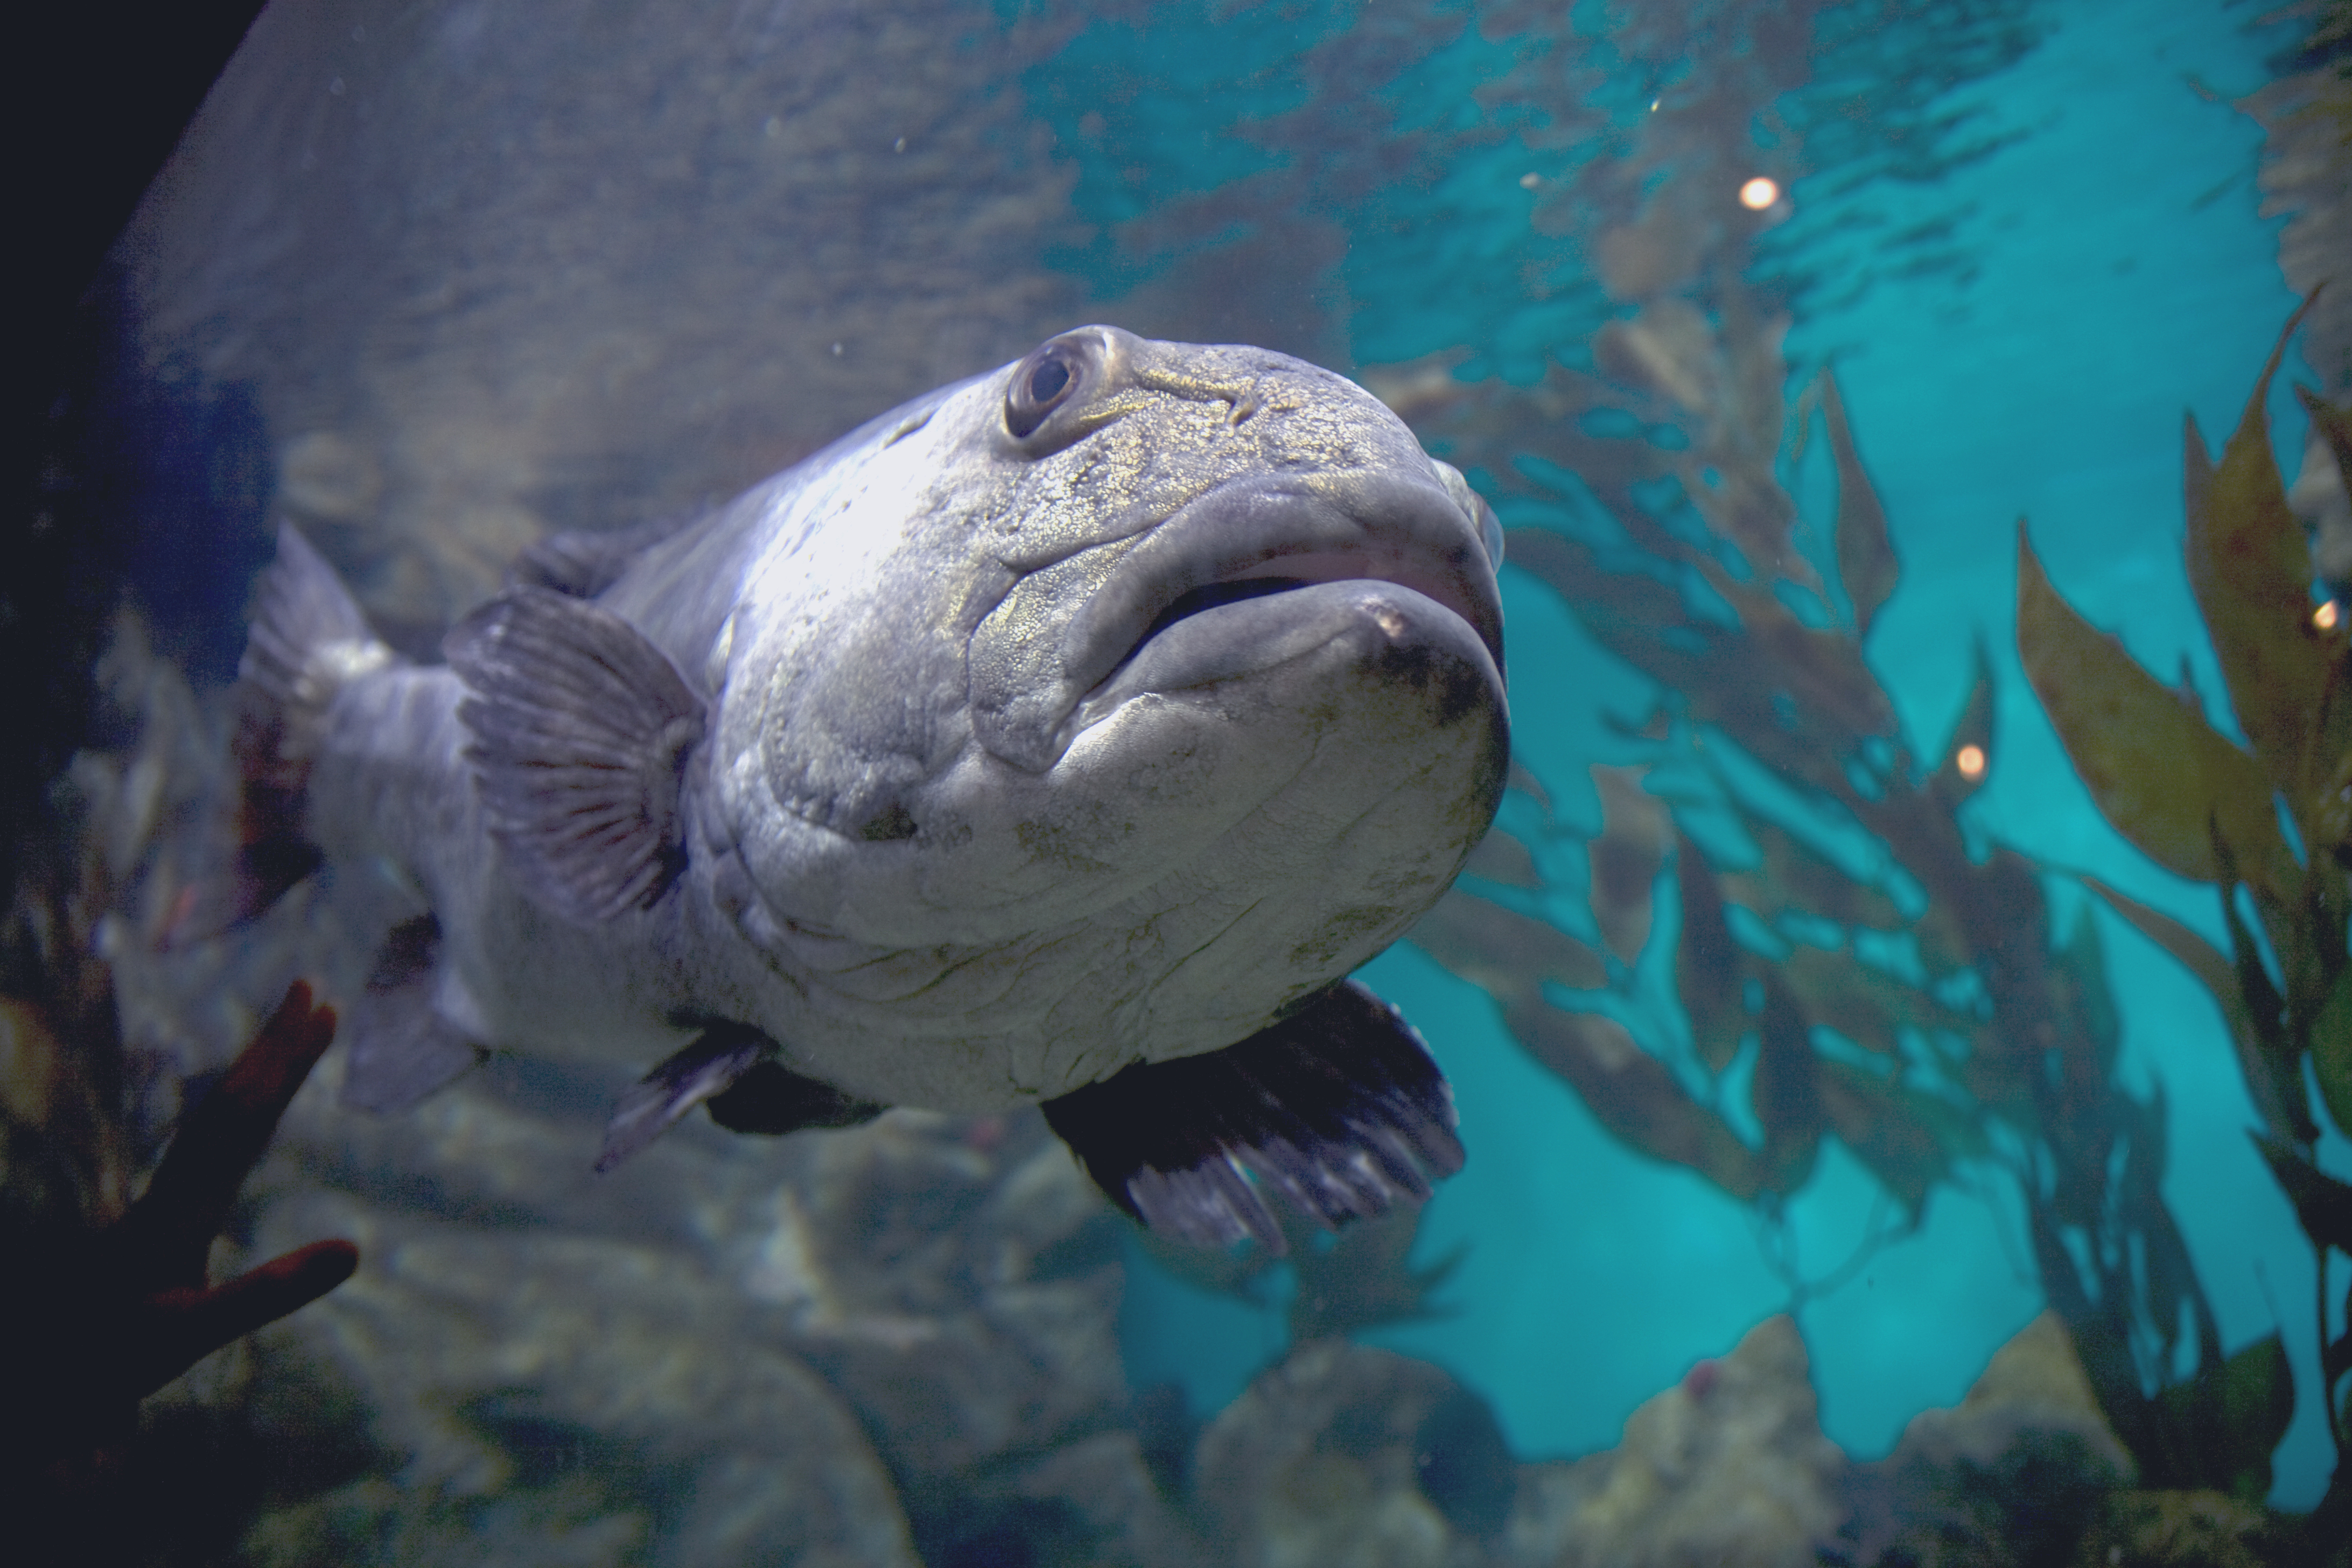 A giant sea bass at the California Academy of Sciences aquarium (Flickr: Caitlin Childs)